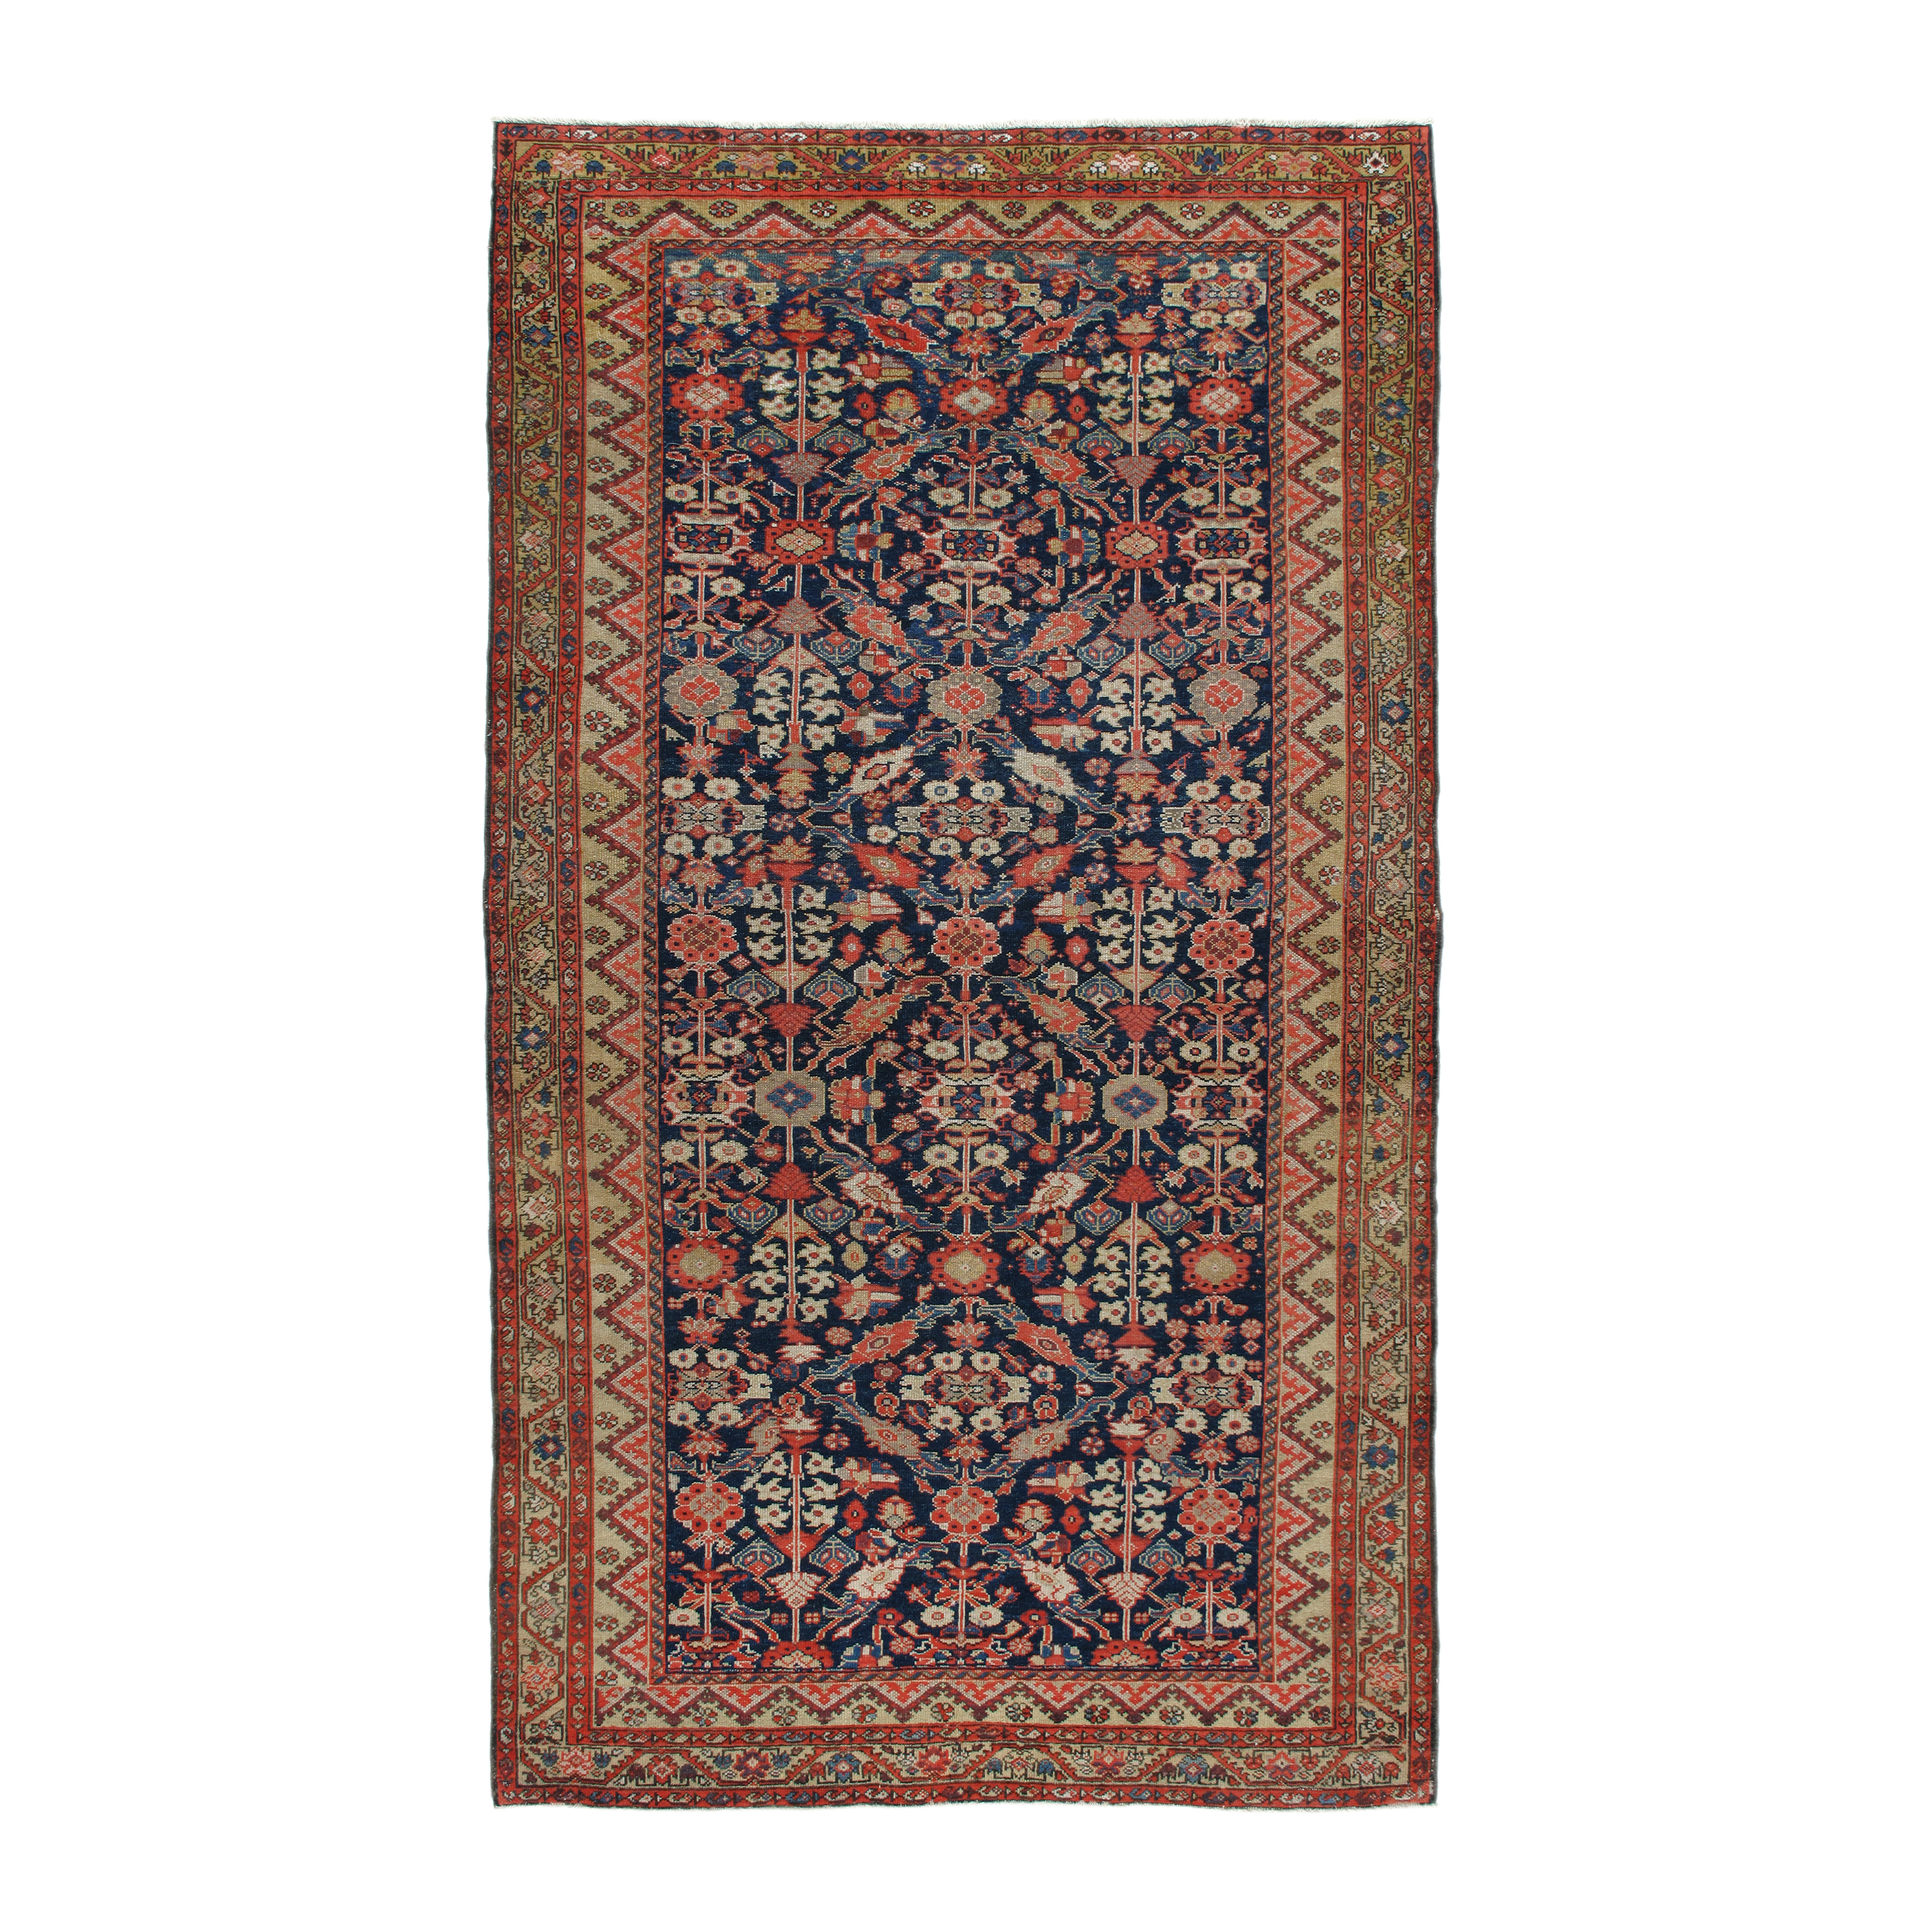 This Malayer rug is hand-knotted and made of 100% wool